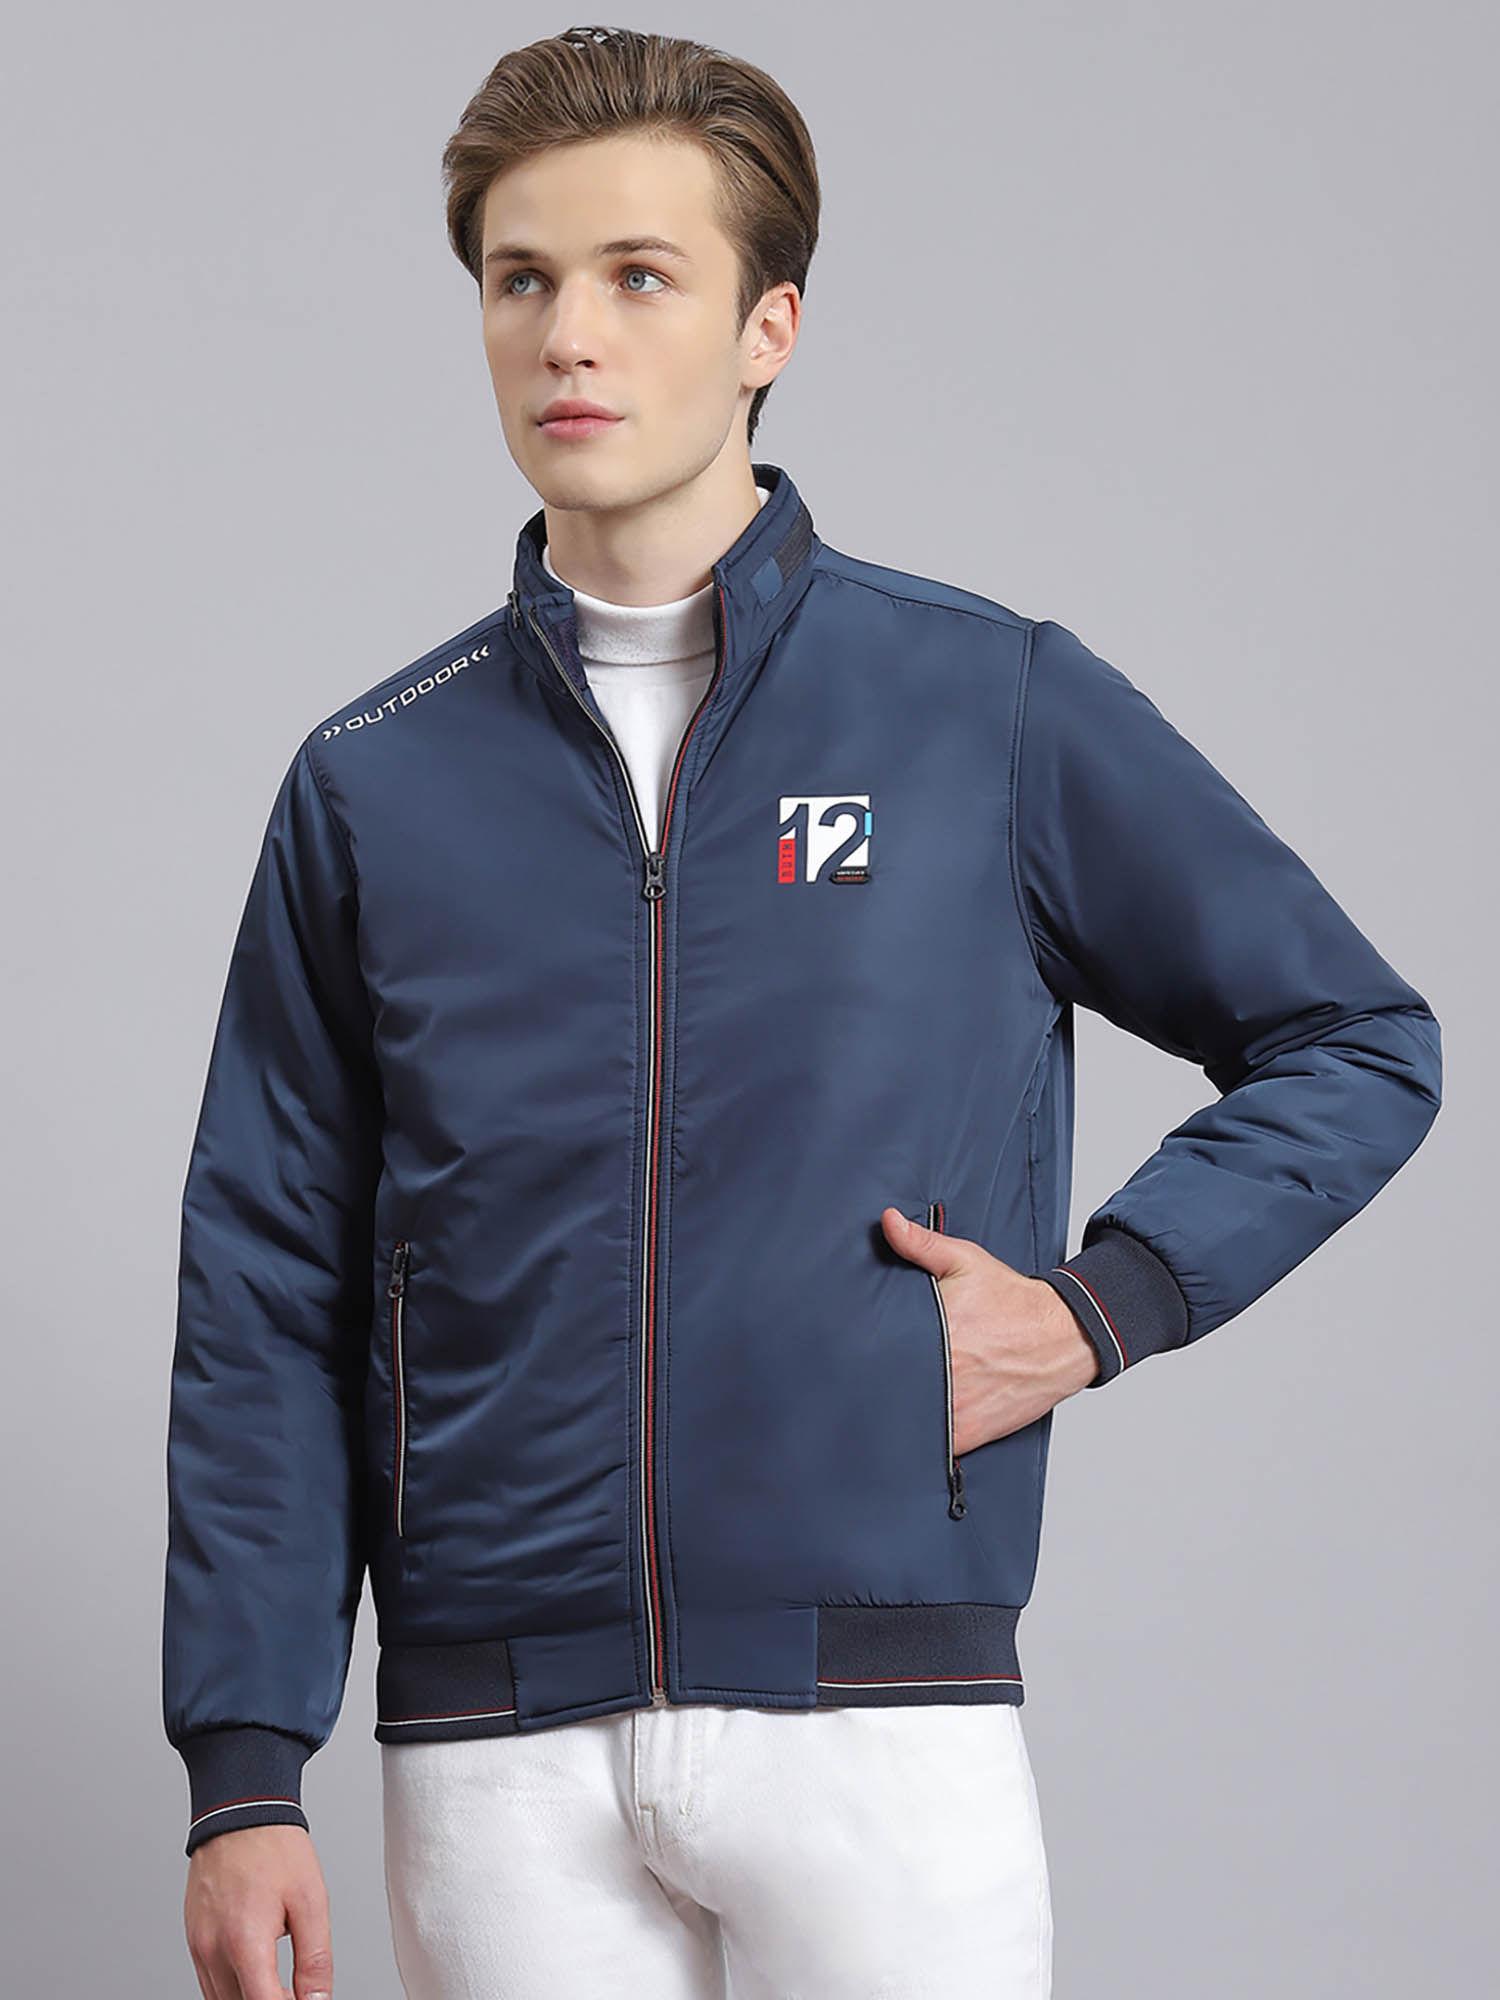 navy-blue-solid-stand-collar-jacket